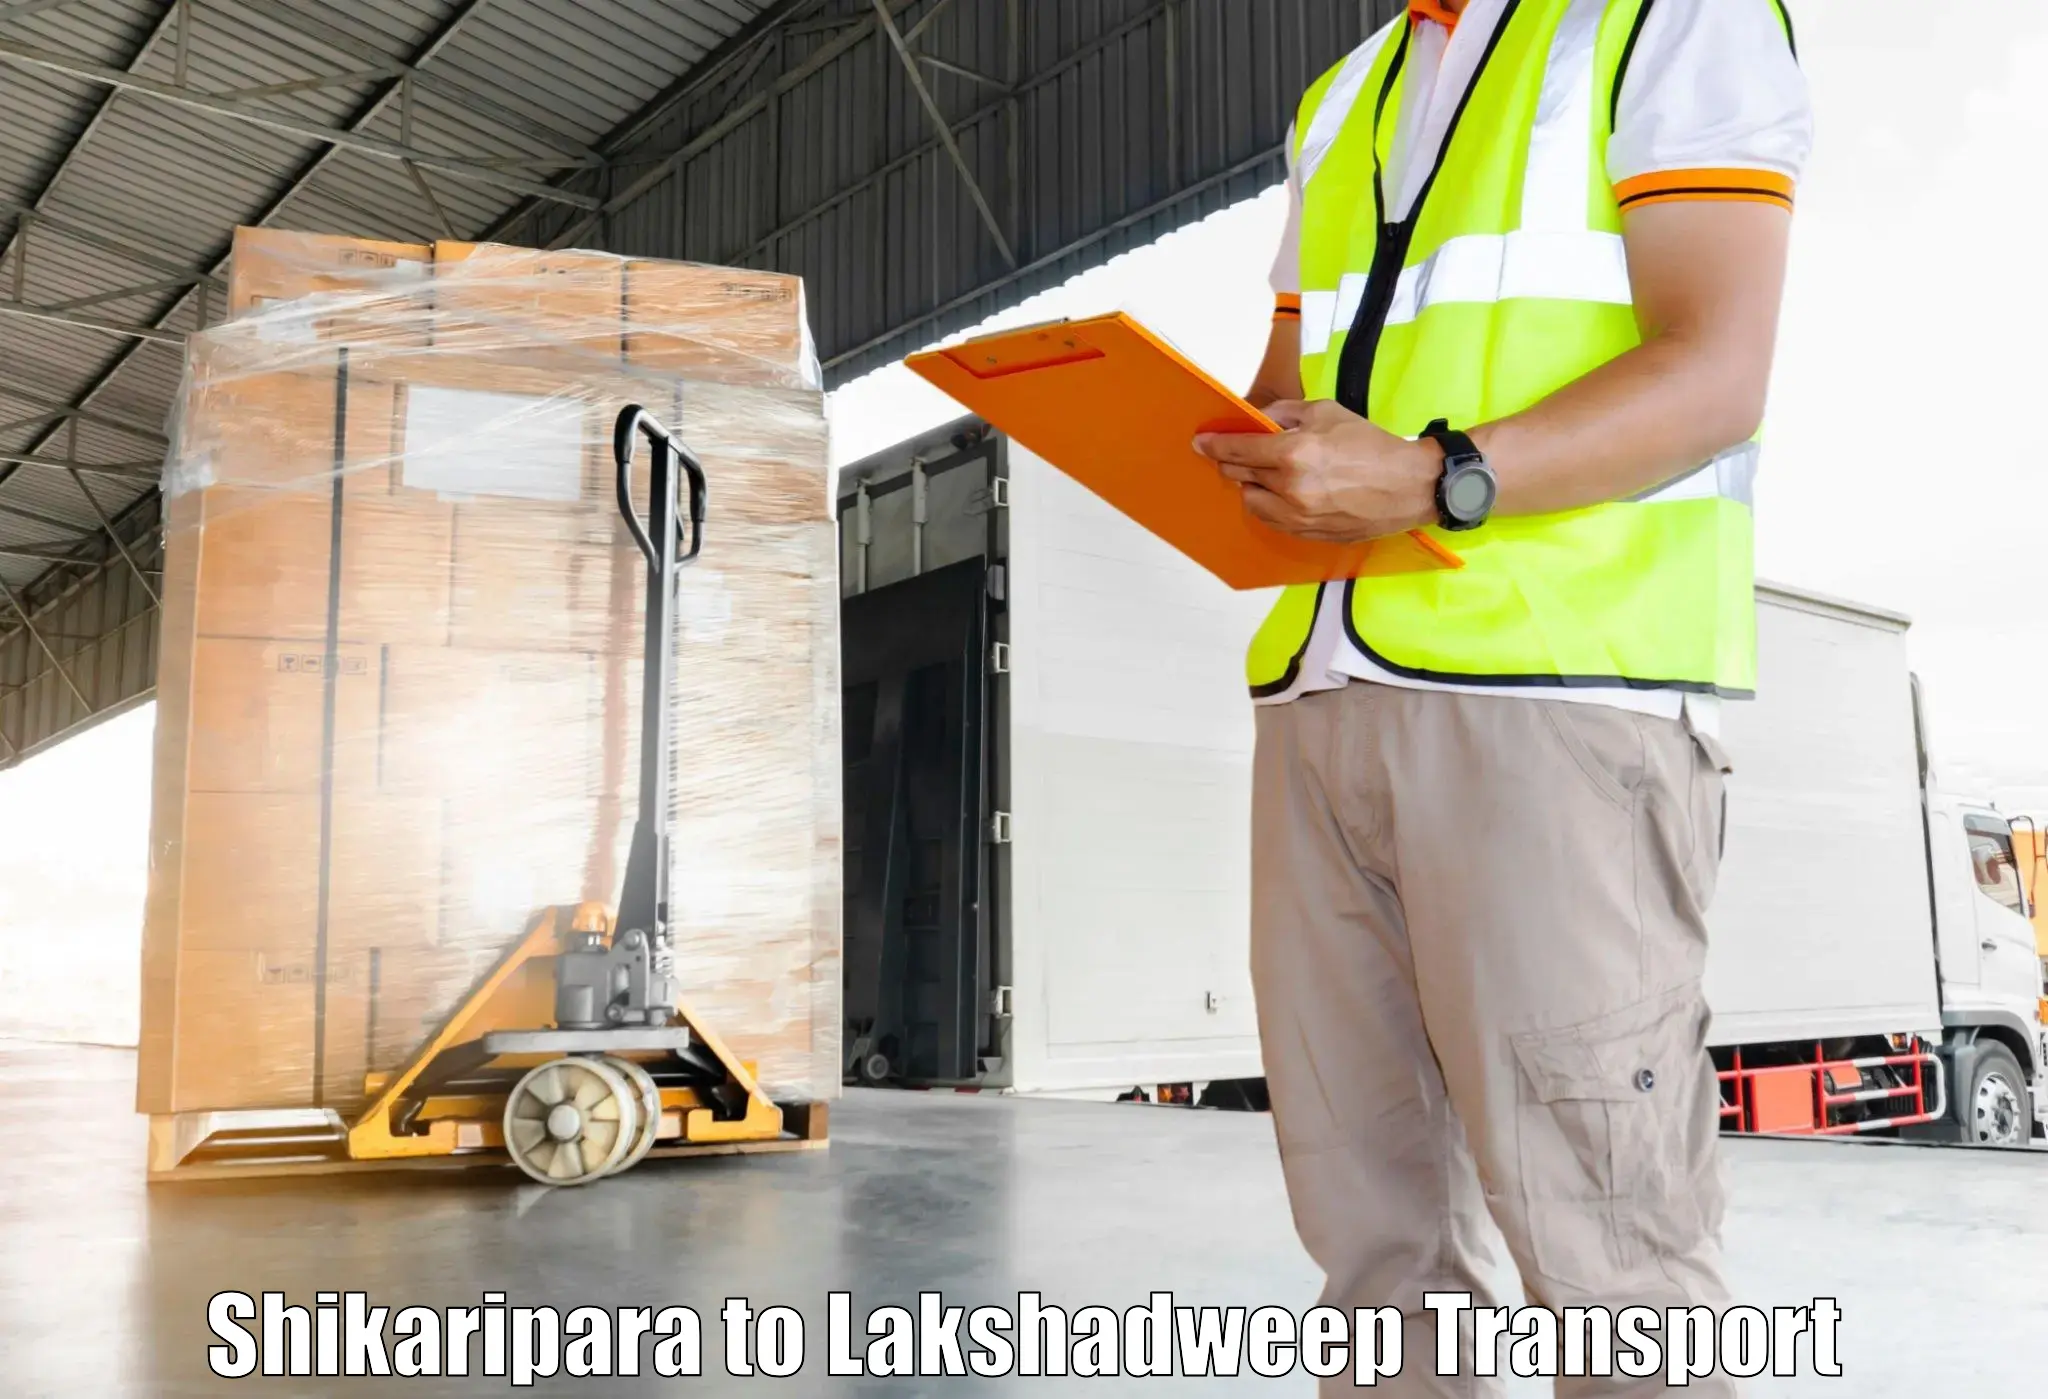 Transport bike from one state to another Shikaripara to Lakshadweep